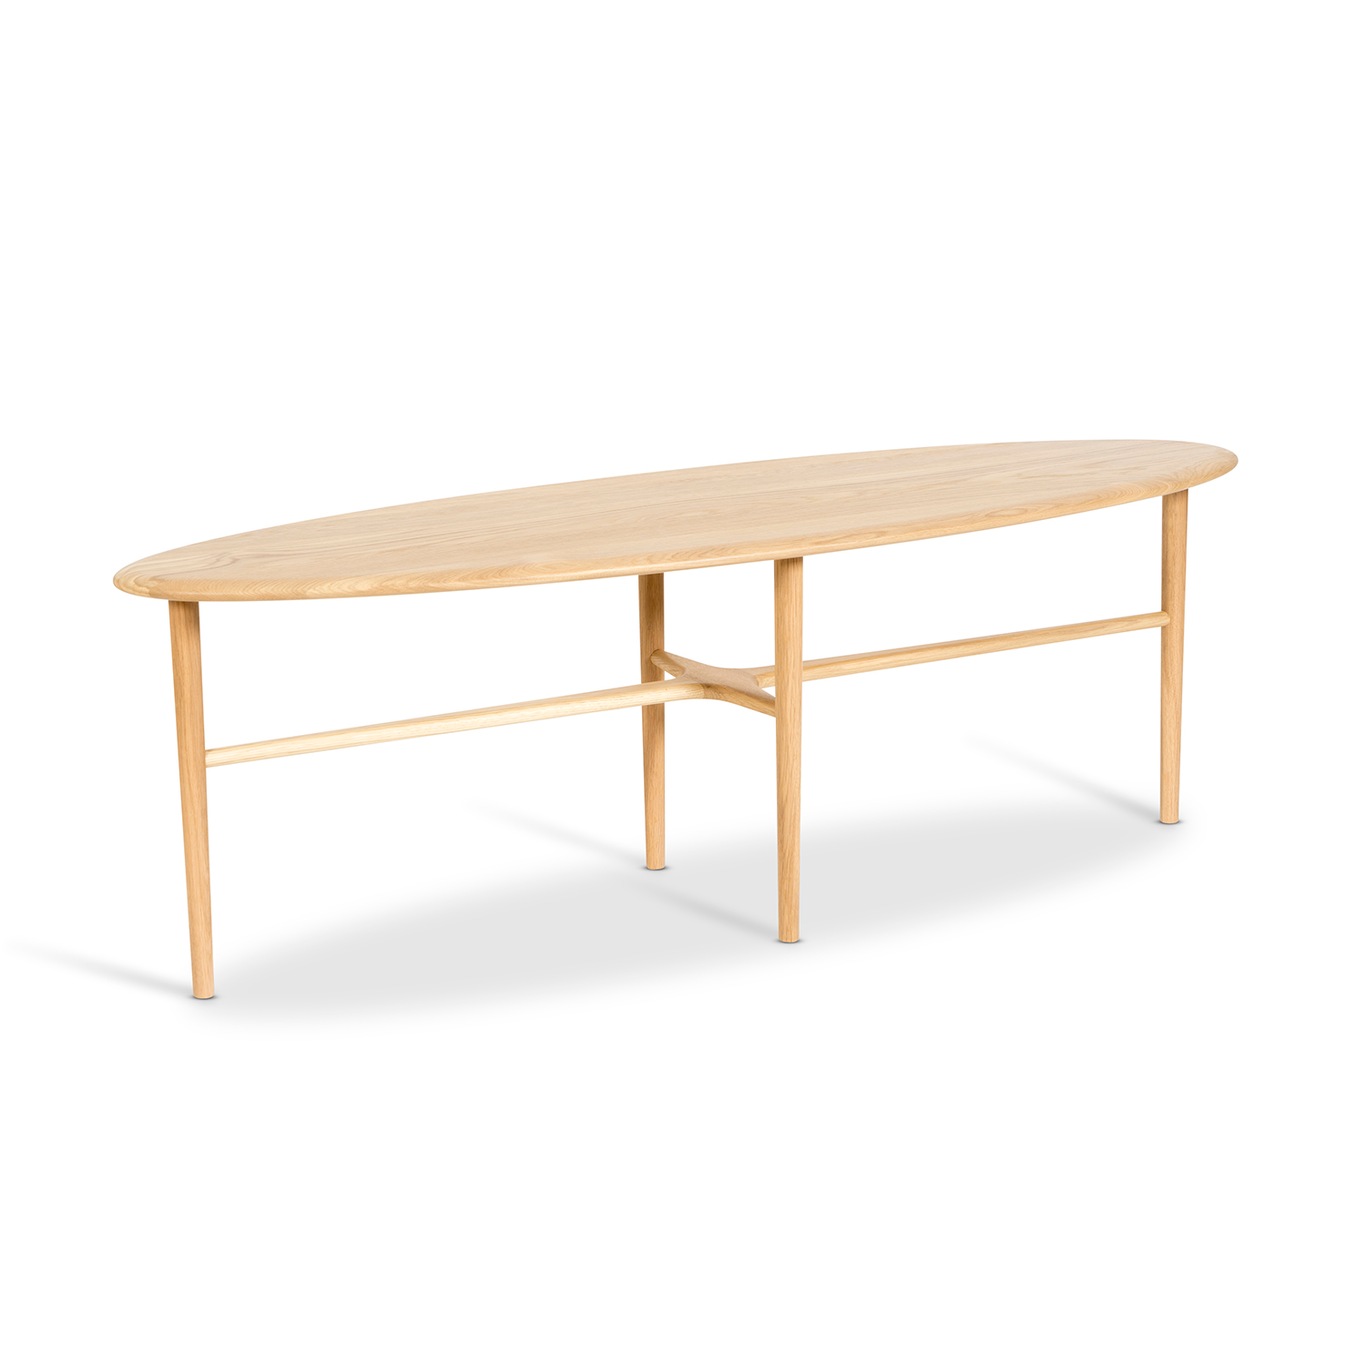 Crest Oval Coffee Table 150x50 cm, Clear Oak